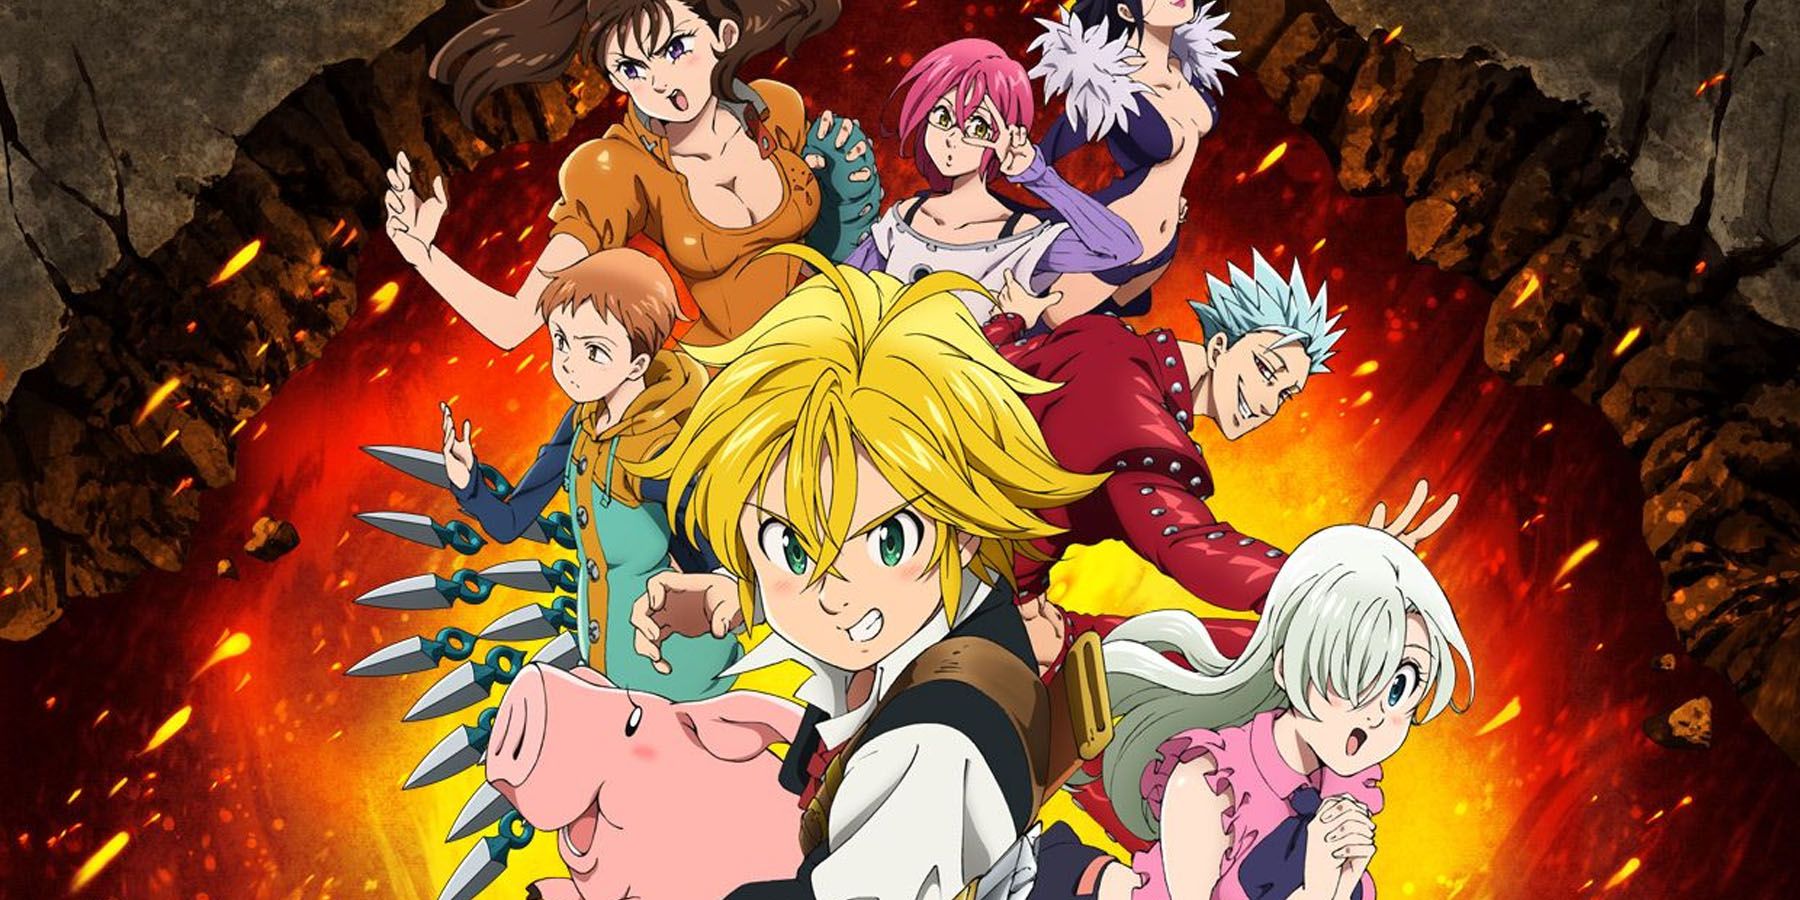 Why do people say that season three of Seven Deadly Sins is bad? I